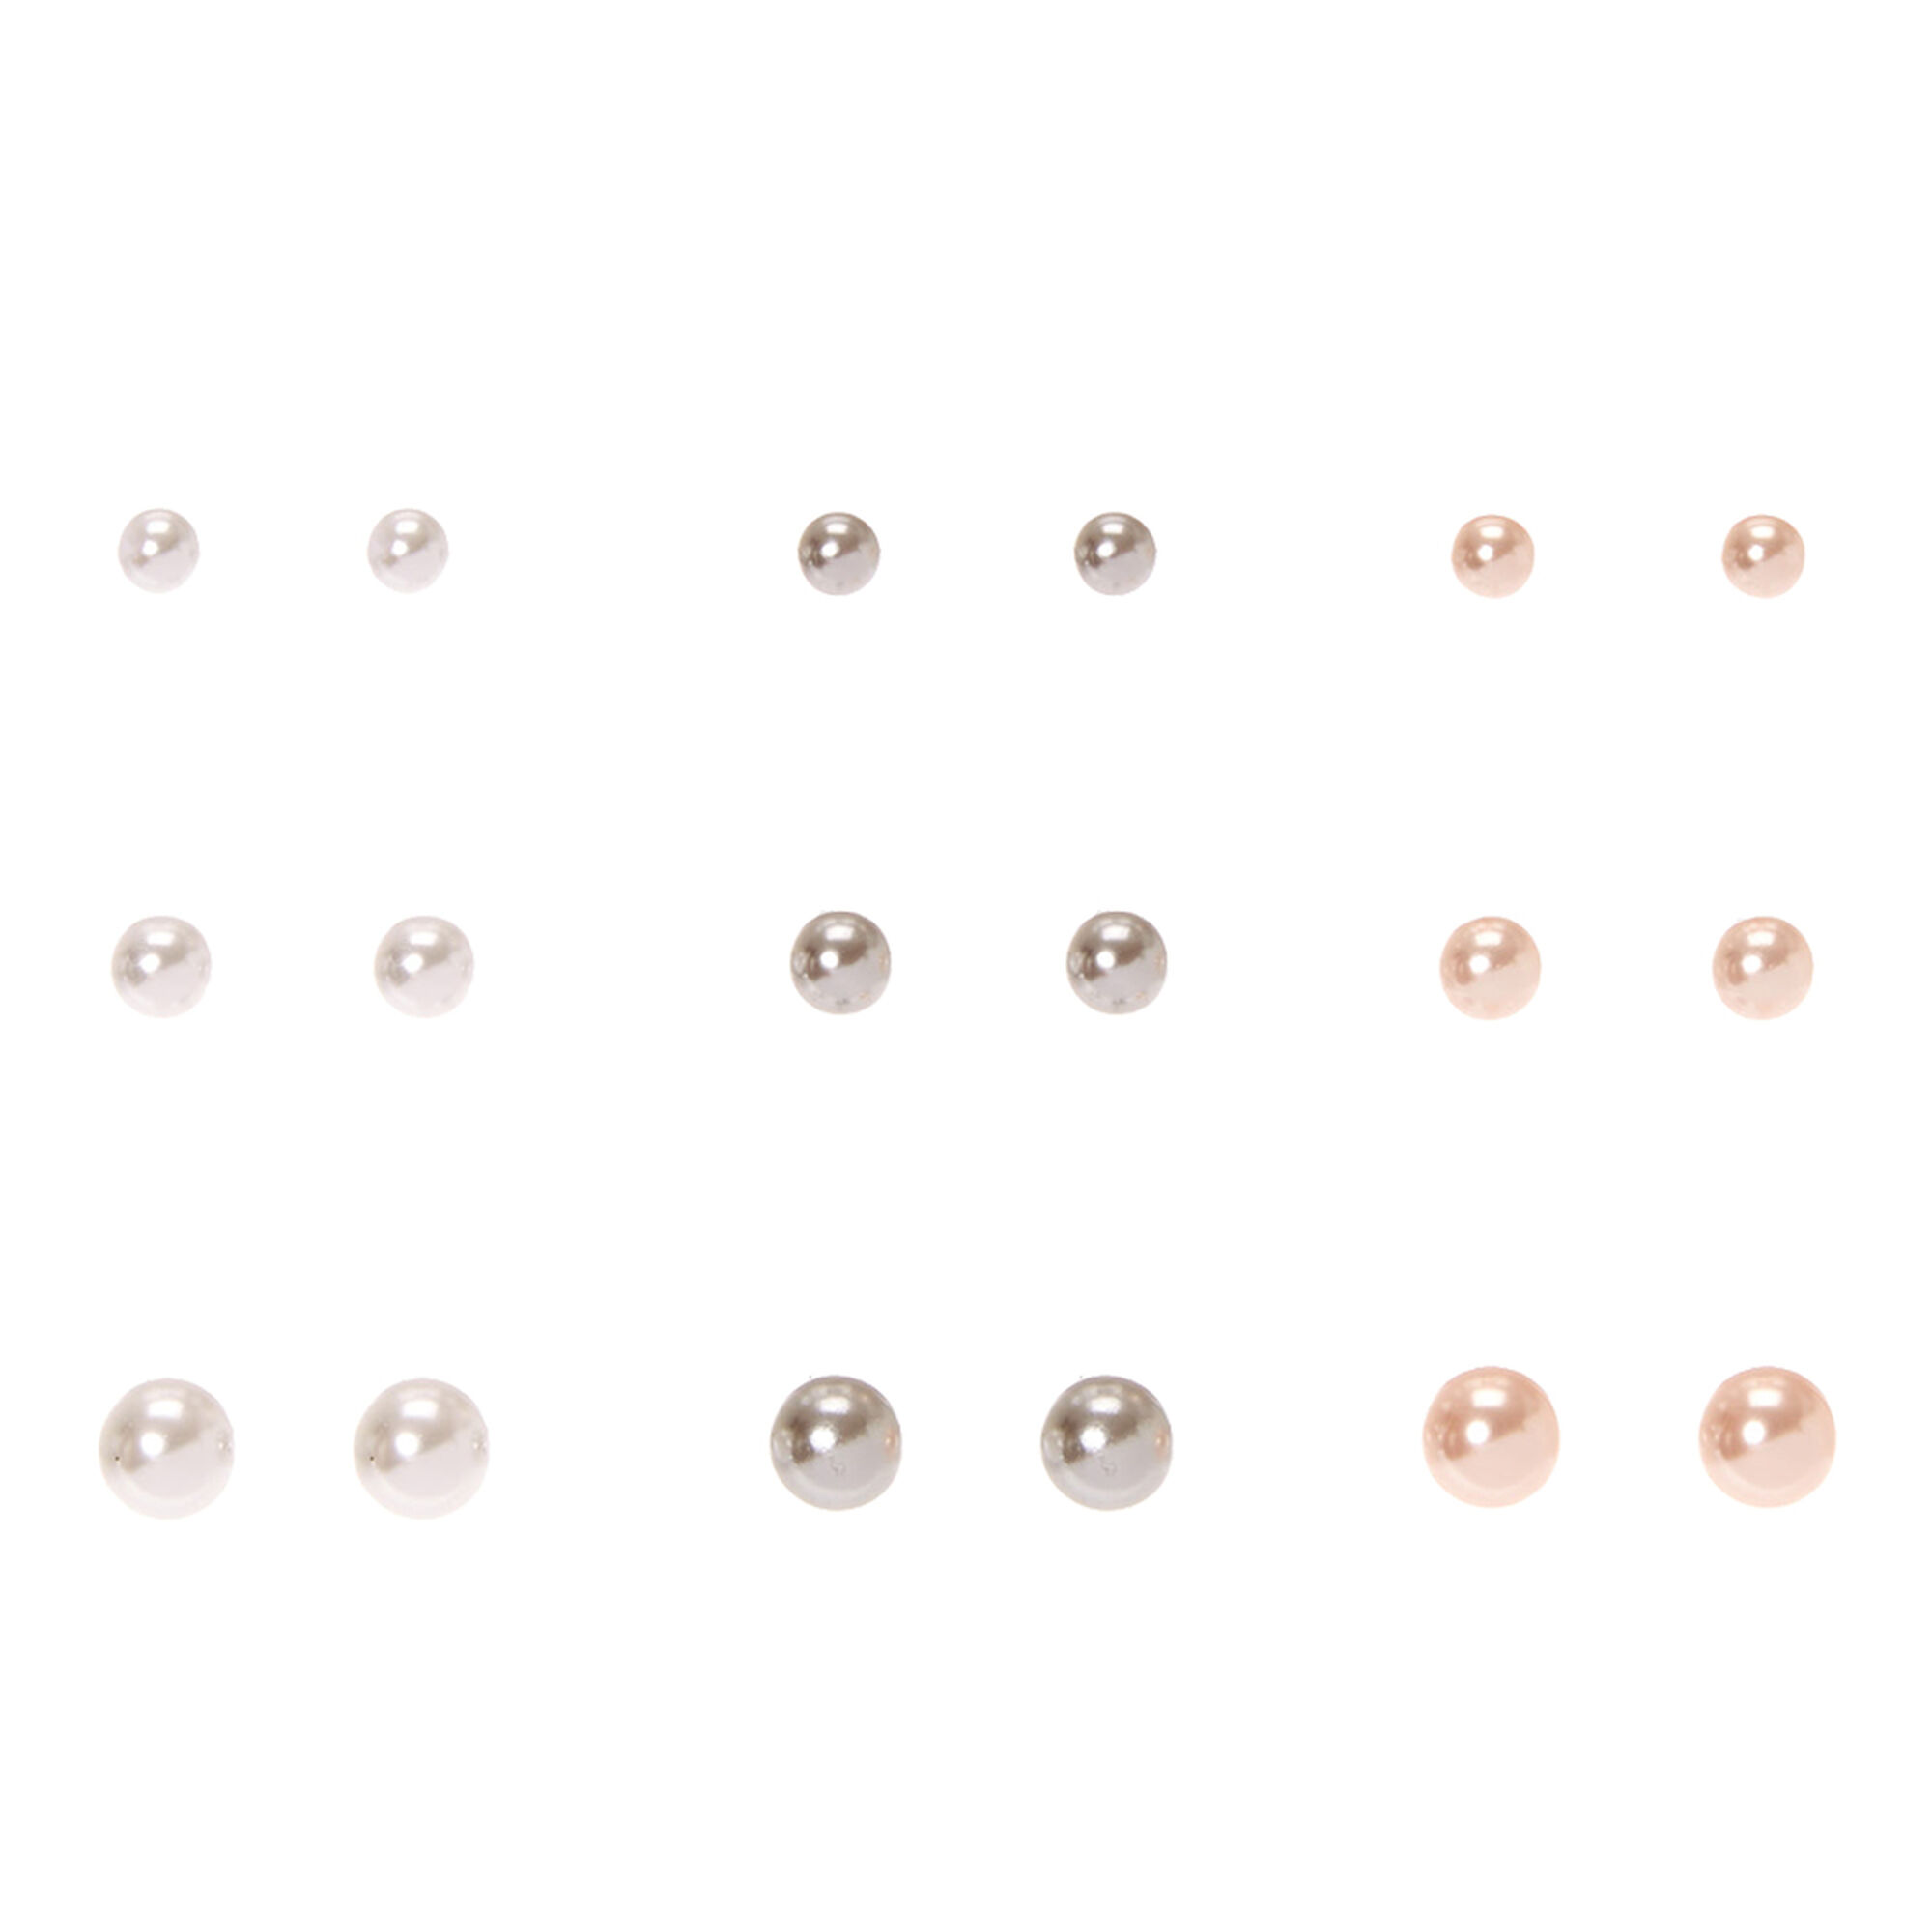 View Claires 9 Pack White Grey Faux Pearl Graduated Stud Earrings Pink information